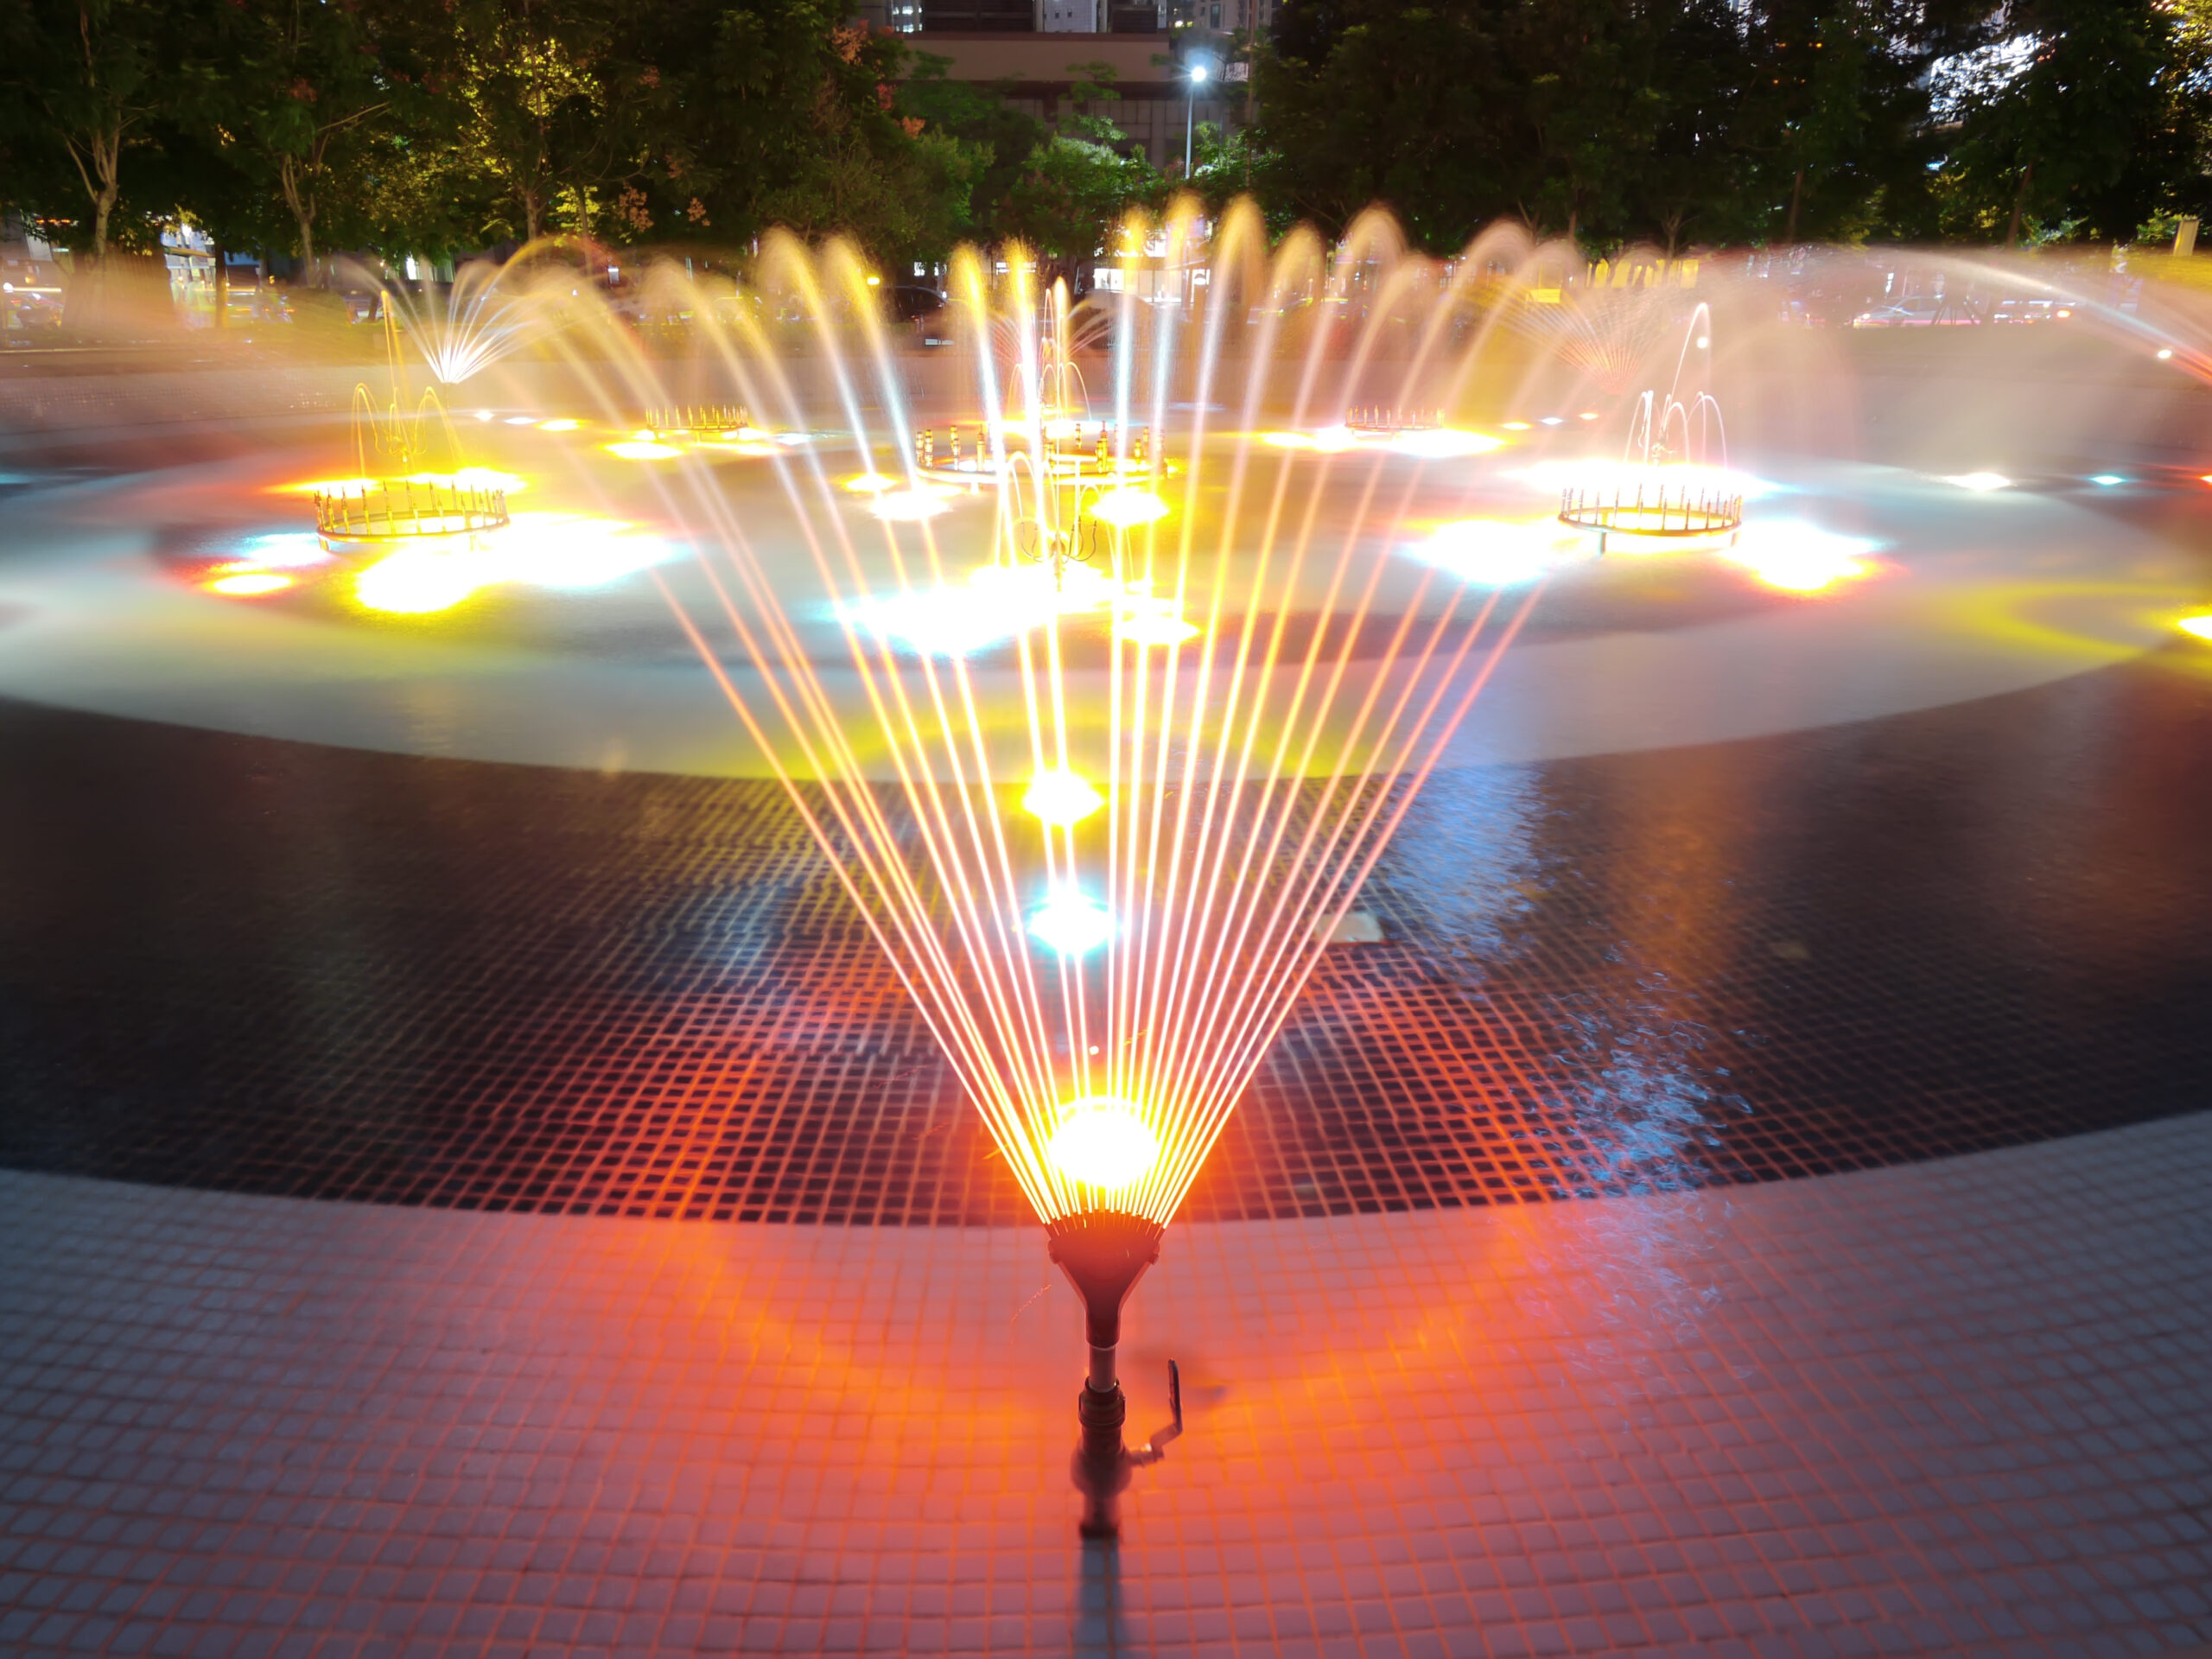 LED pool lighting and fountains in action, creating a visually dynamic and captivating aquatic display with colorful lights and synchronized water features.